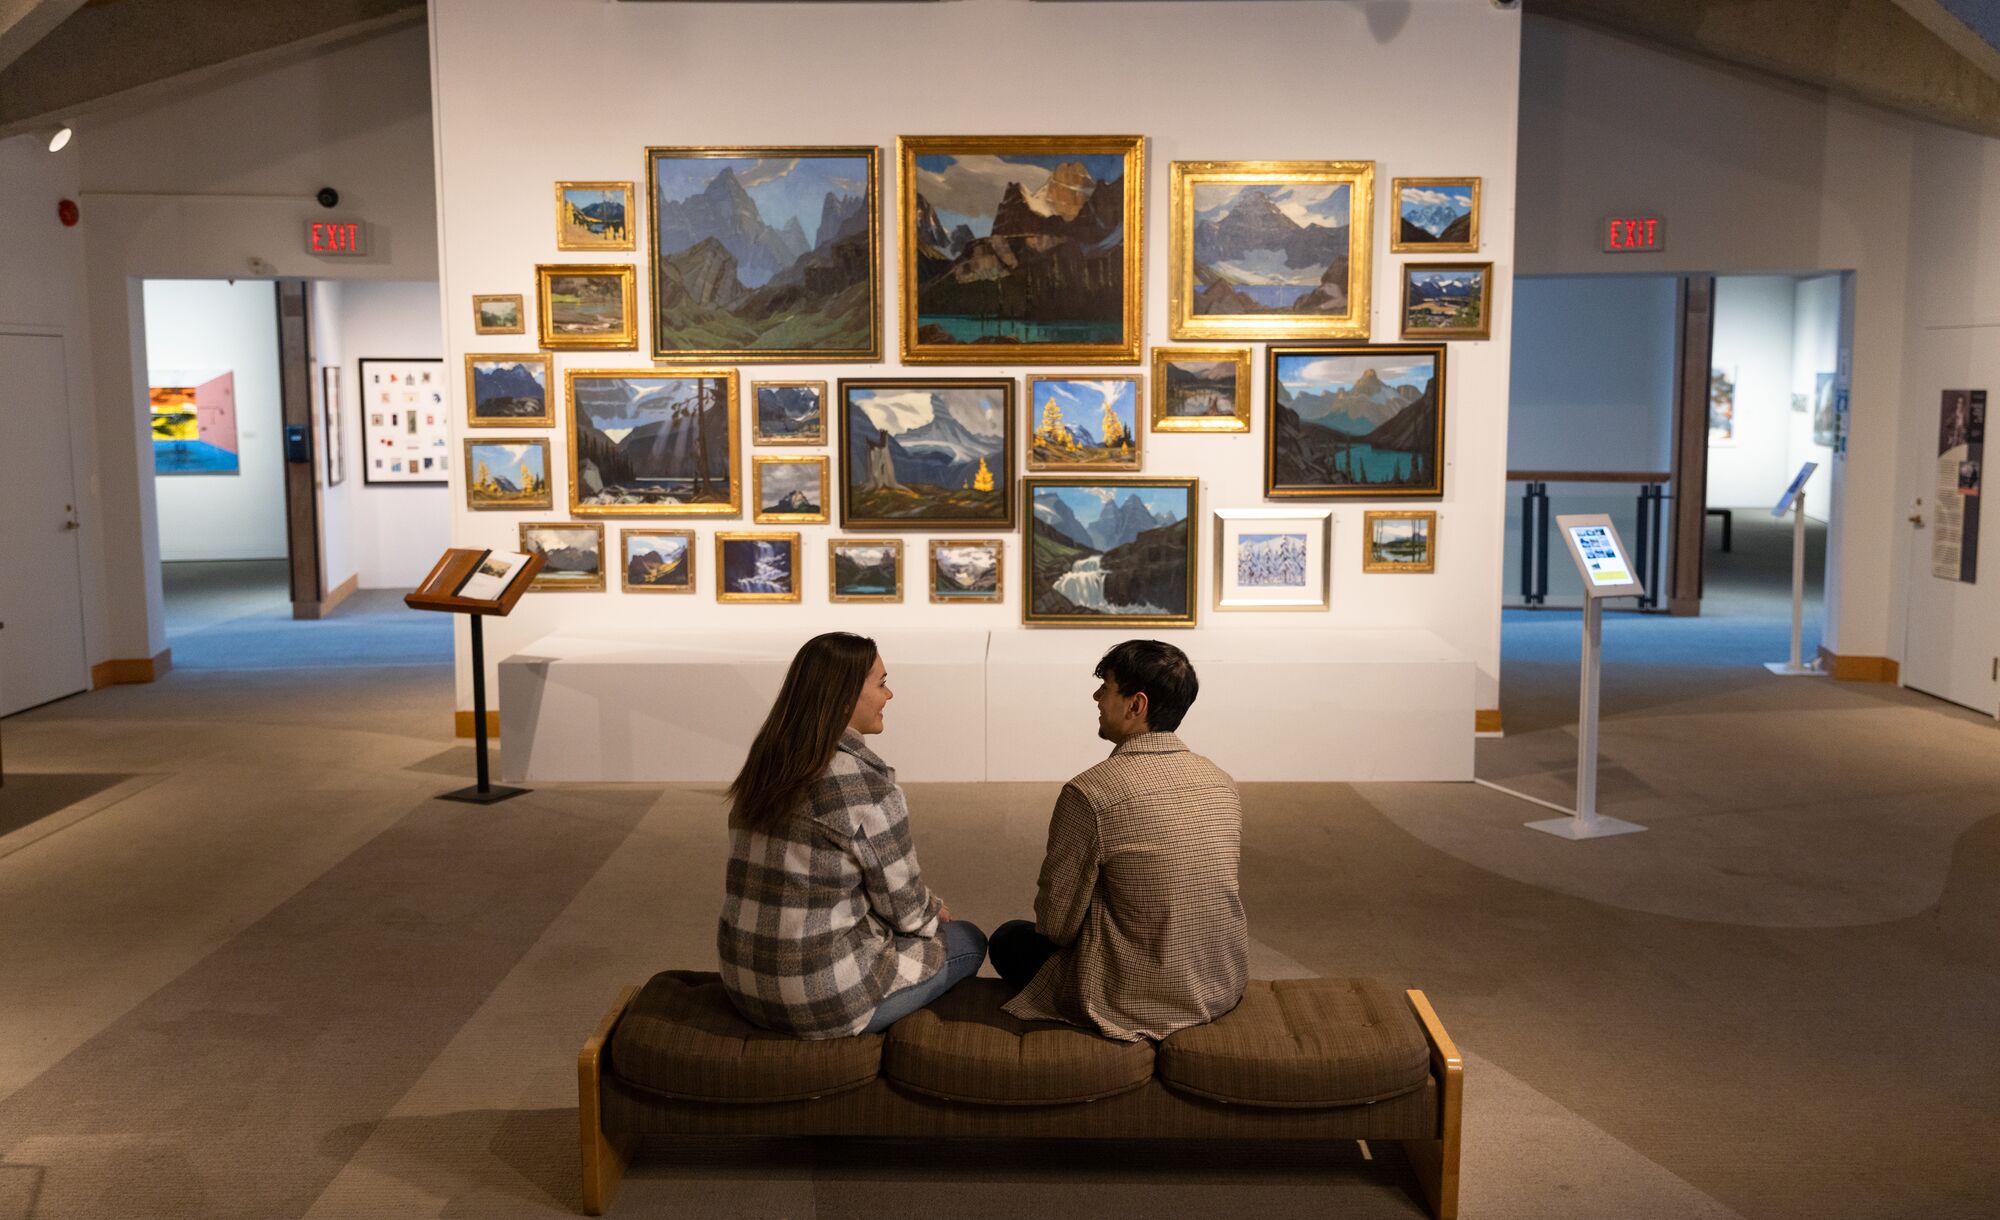 Two people sit on a bench in front of an art gallery in the Whyte Museum.